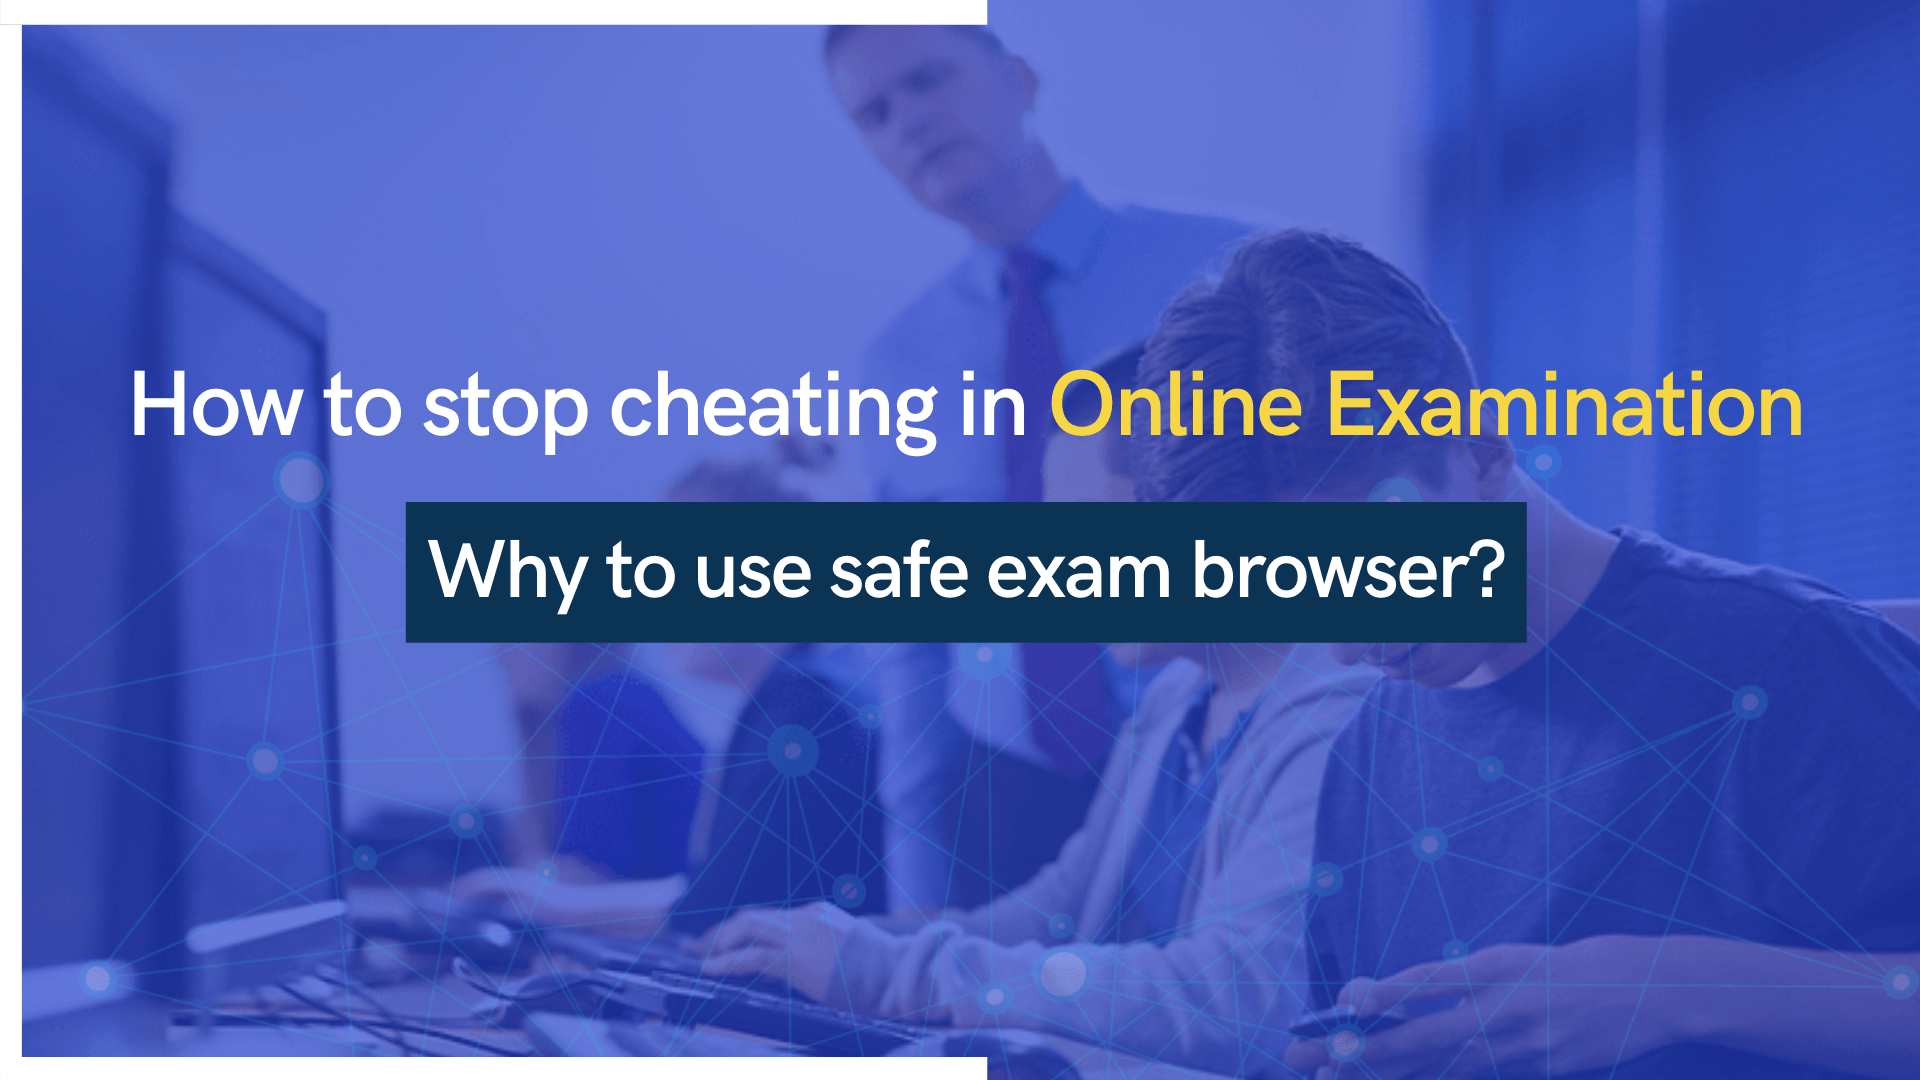 safe exam browser pictures not showing in test